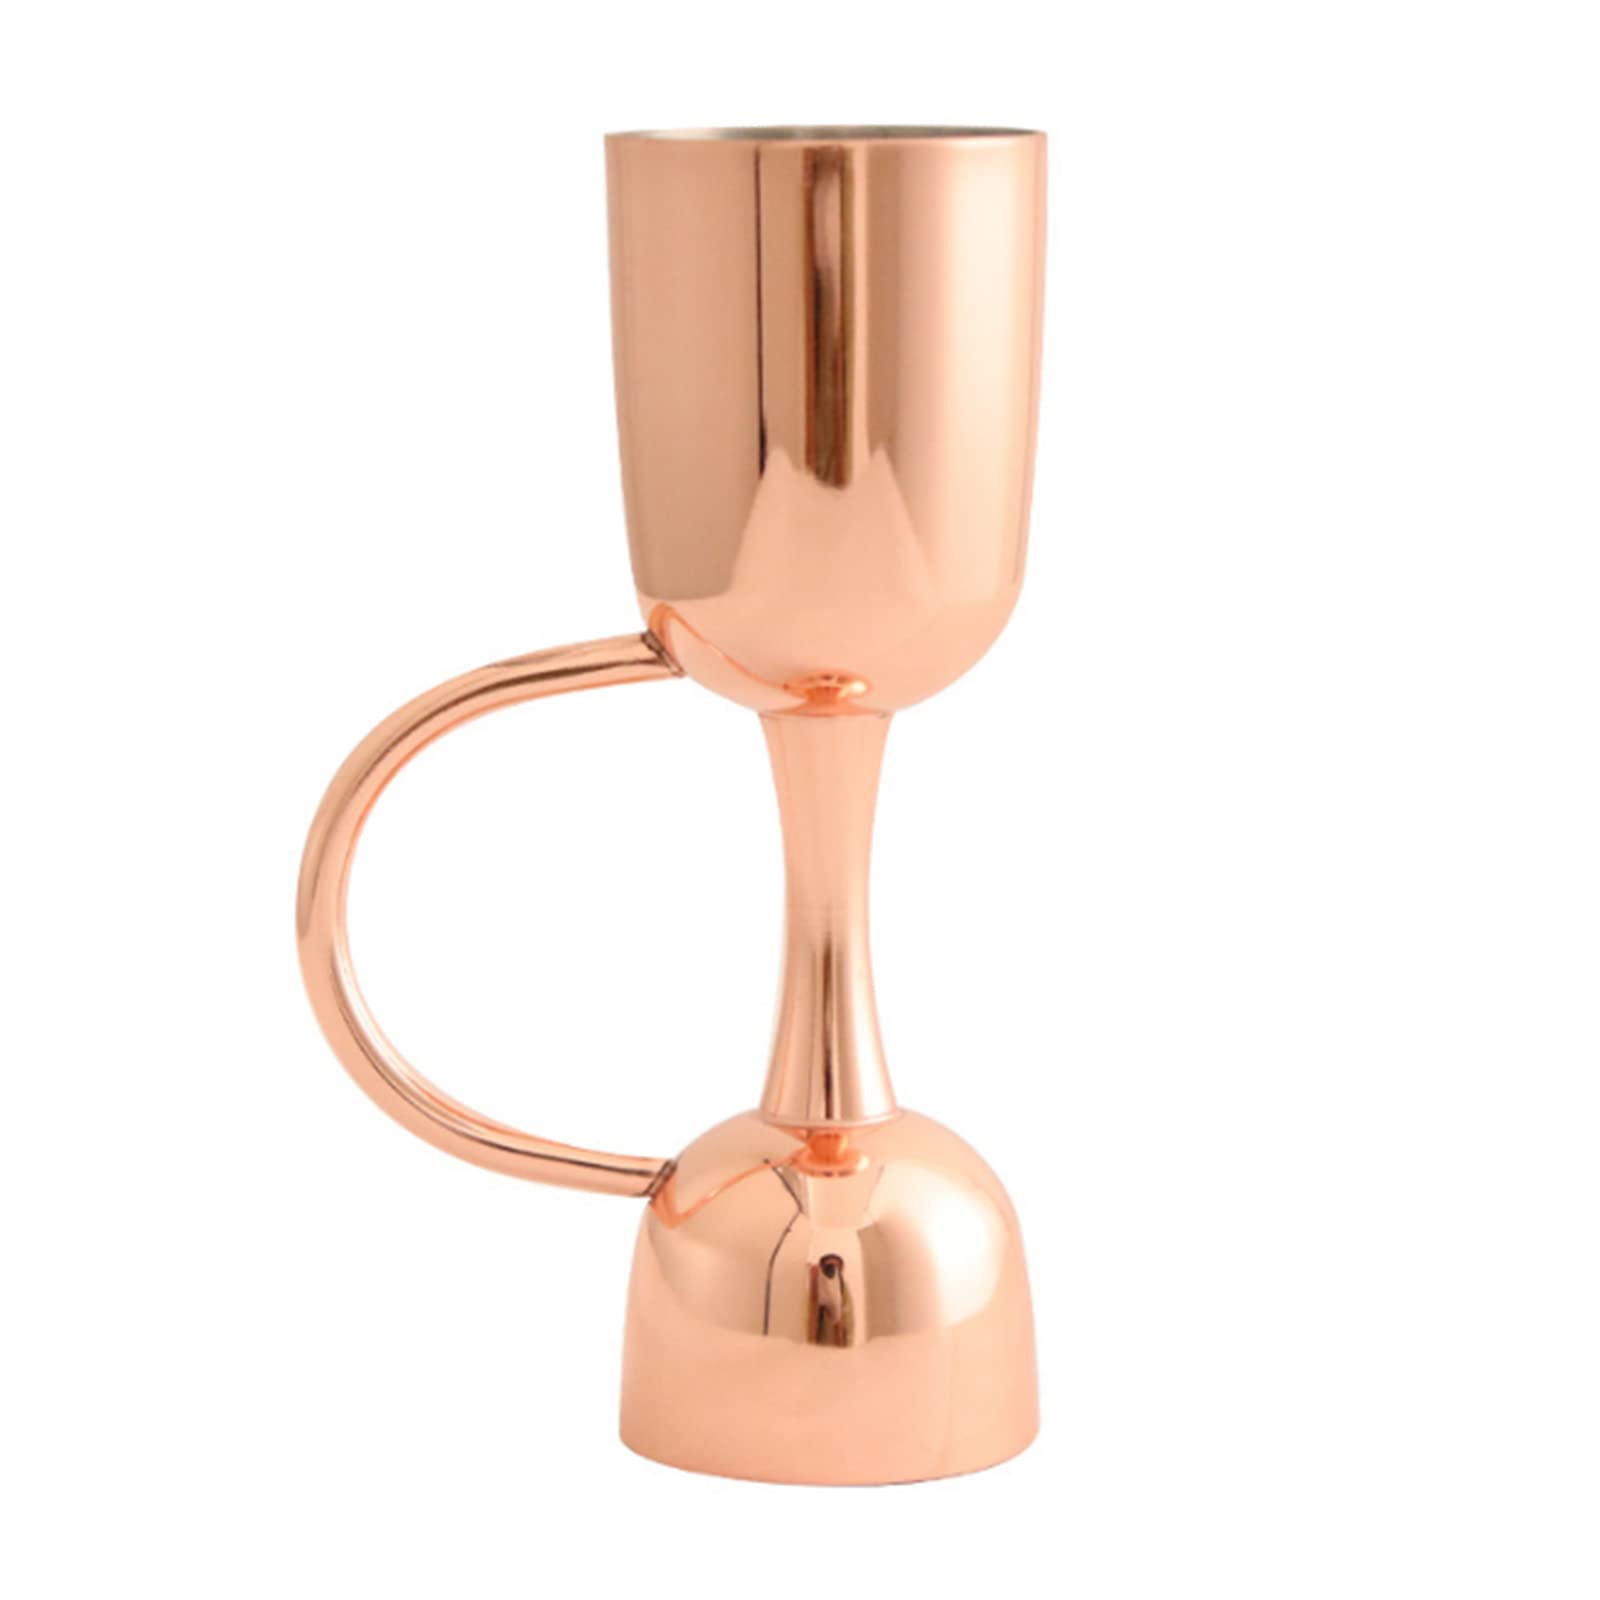 BrandName cocktail Jigger for Bartending, 20ml50ml Bartending Alcohol  Measuring Tools Stainless Steel Double Jigger with Handle (Rose gold